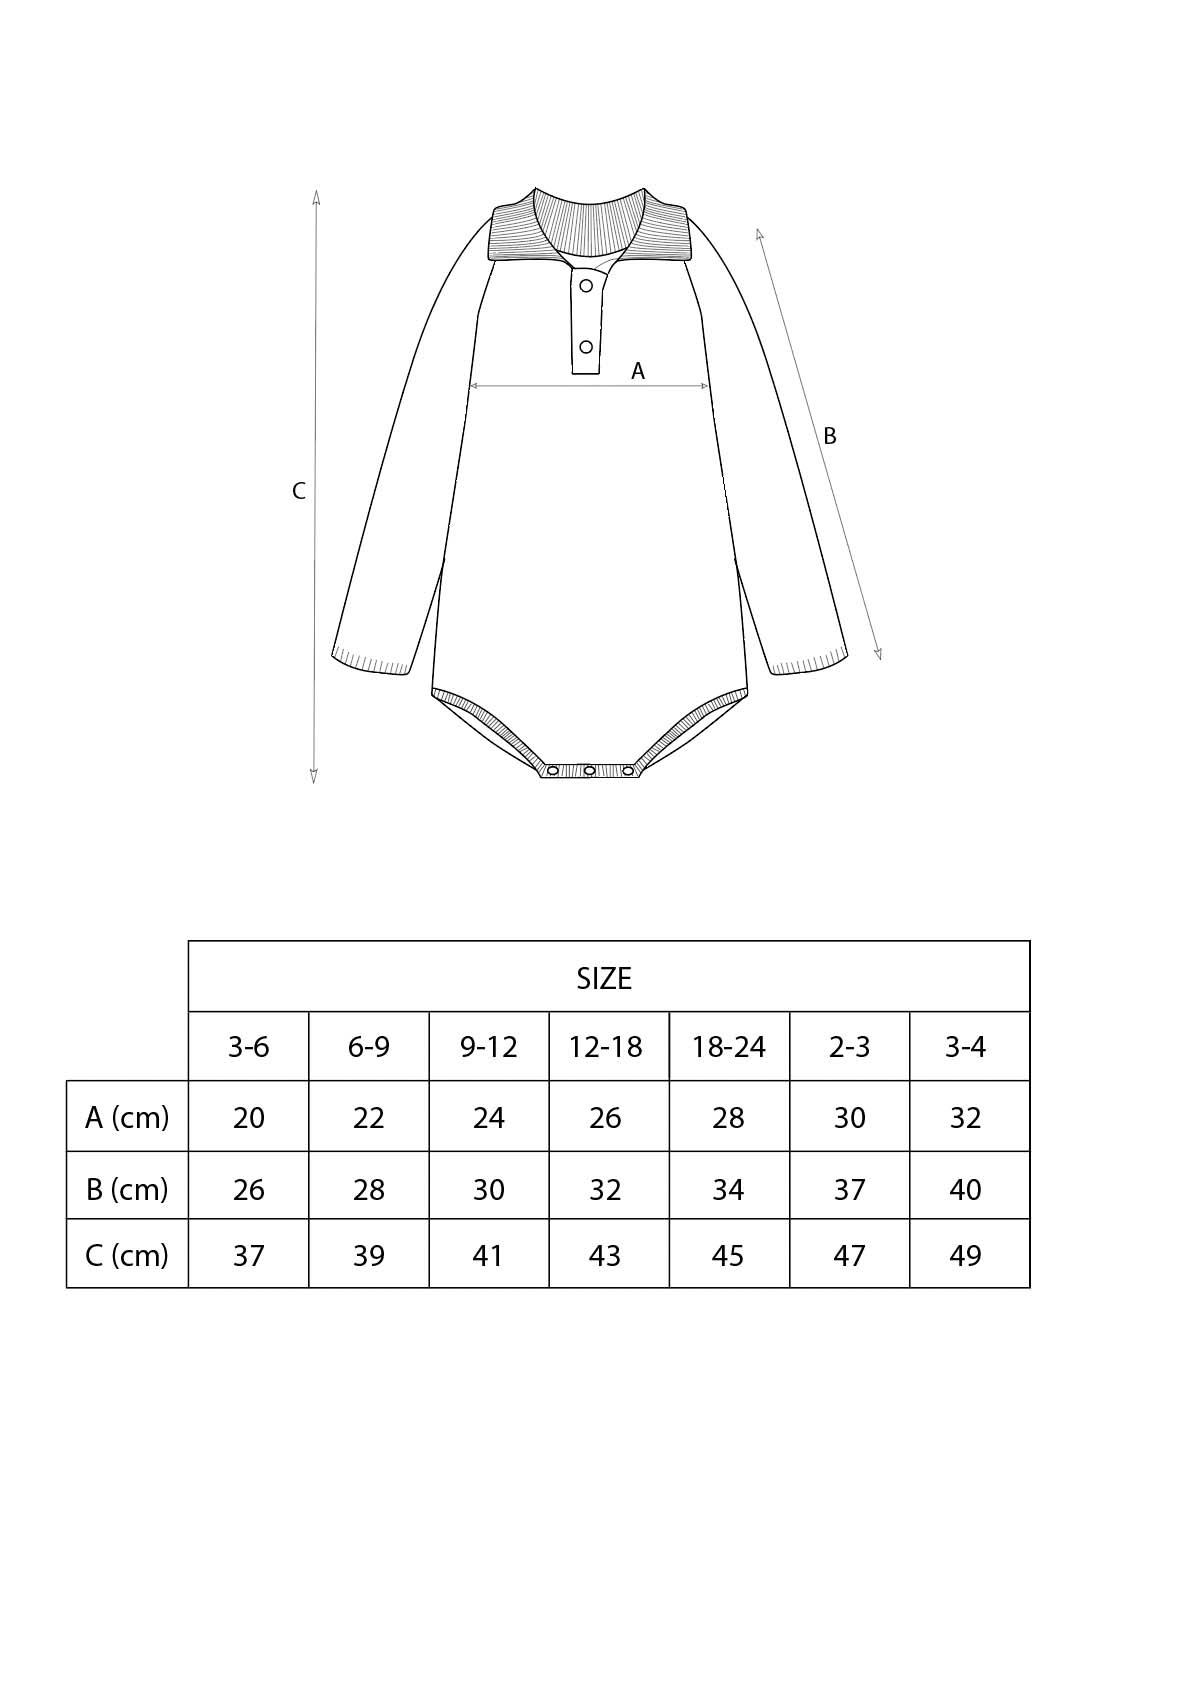 Mod.10.1 Off-white knitted romper suit with shirt-style collar | AW23.24 Mod.10.1 Off-white knitted romper suit with shirt-style collar